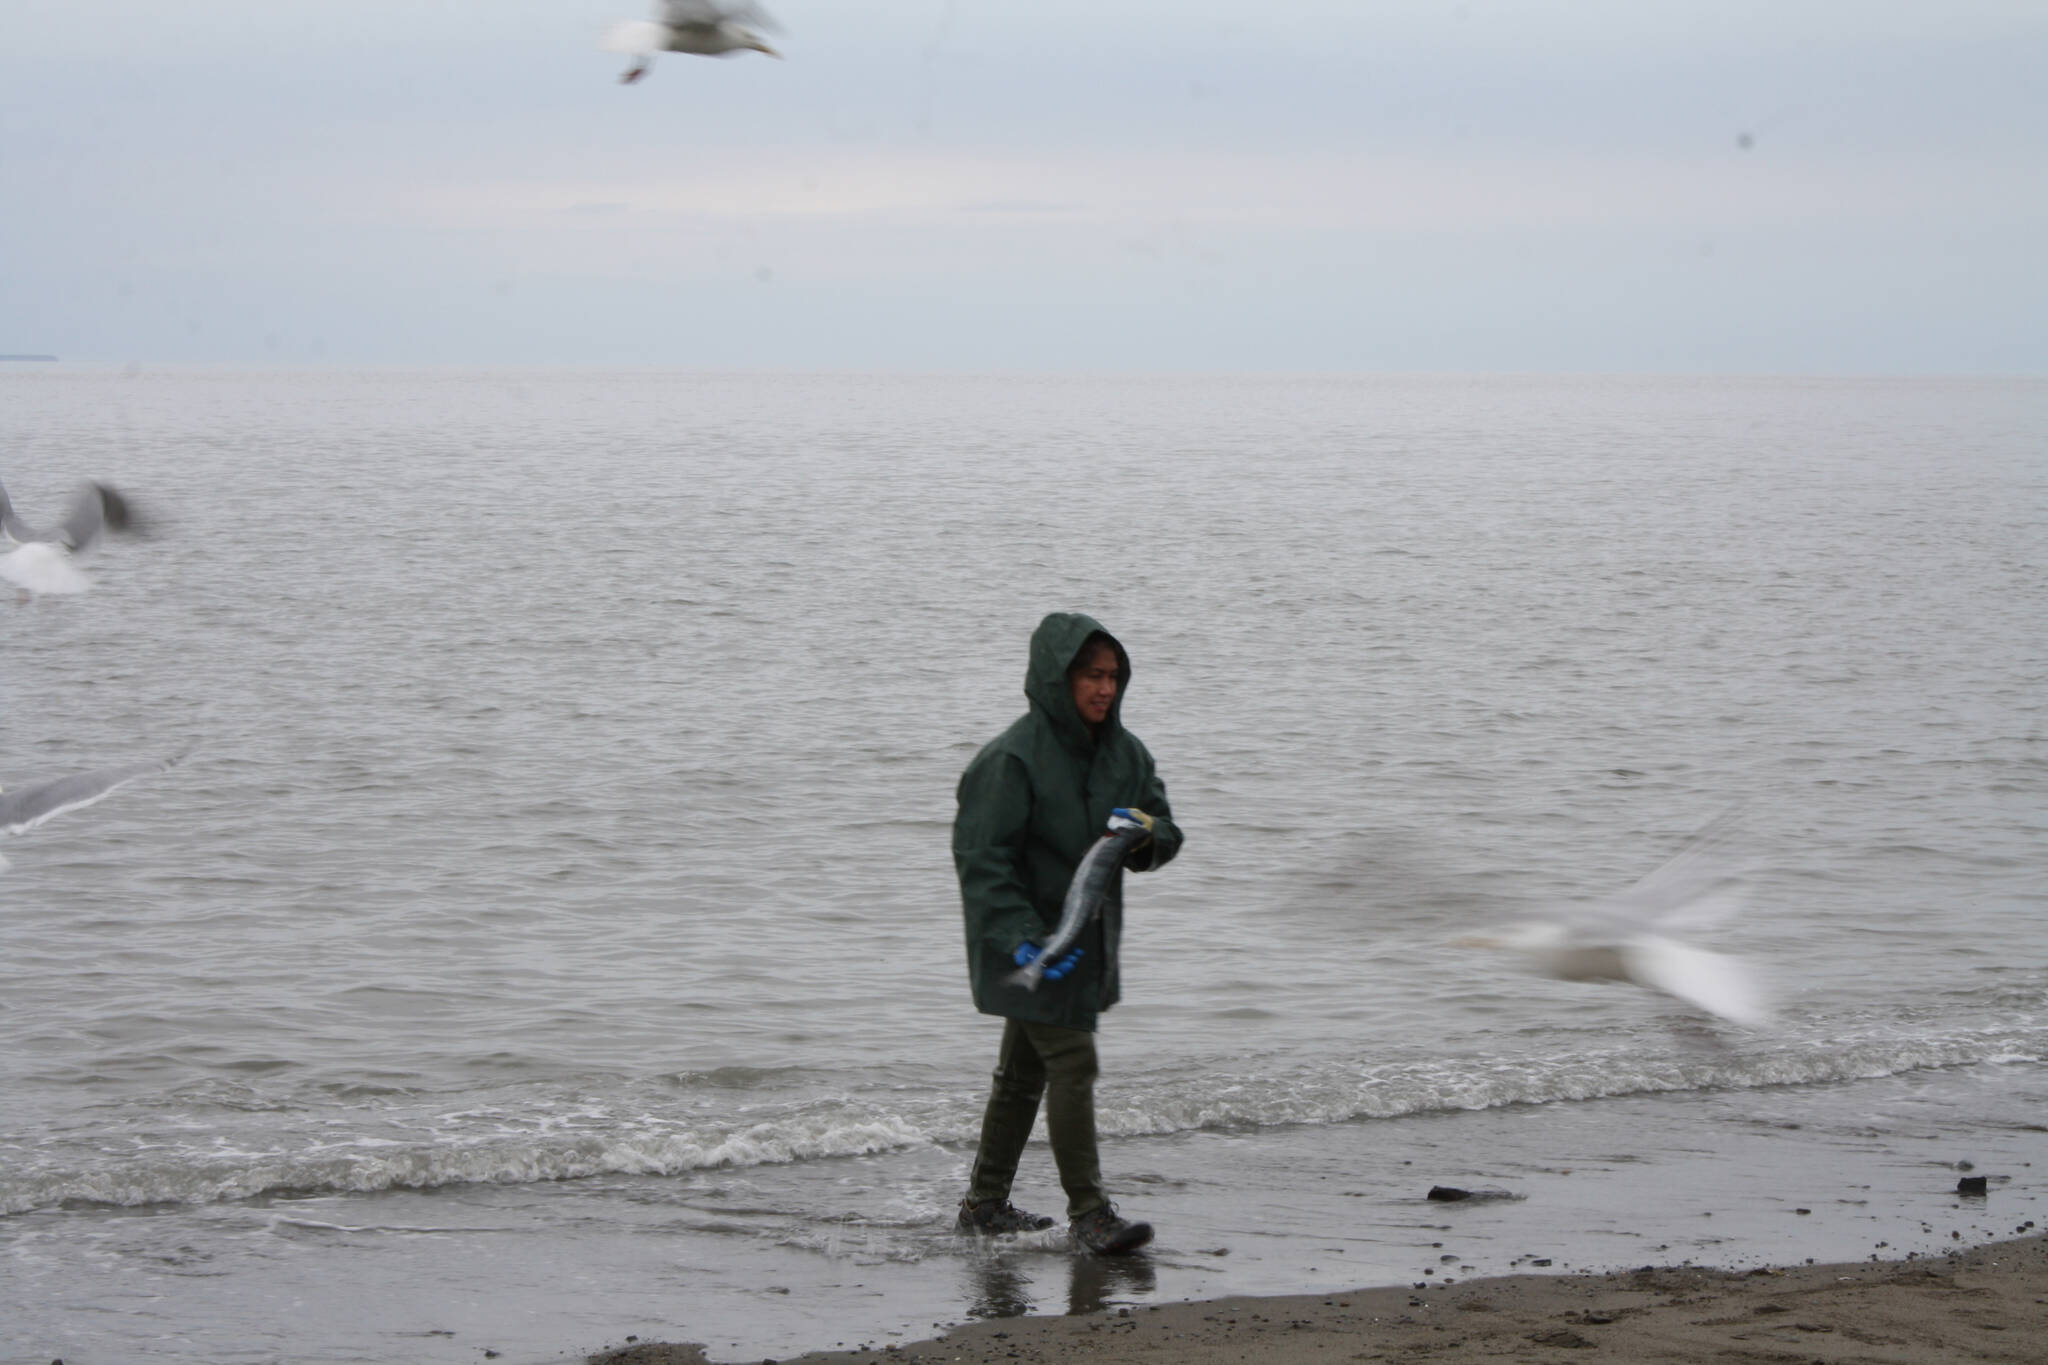 Yvette Pace fishes at North Kenai Beach on Tuesday, July 12, 2022. (Camille Botello/Peninsula Clarion)